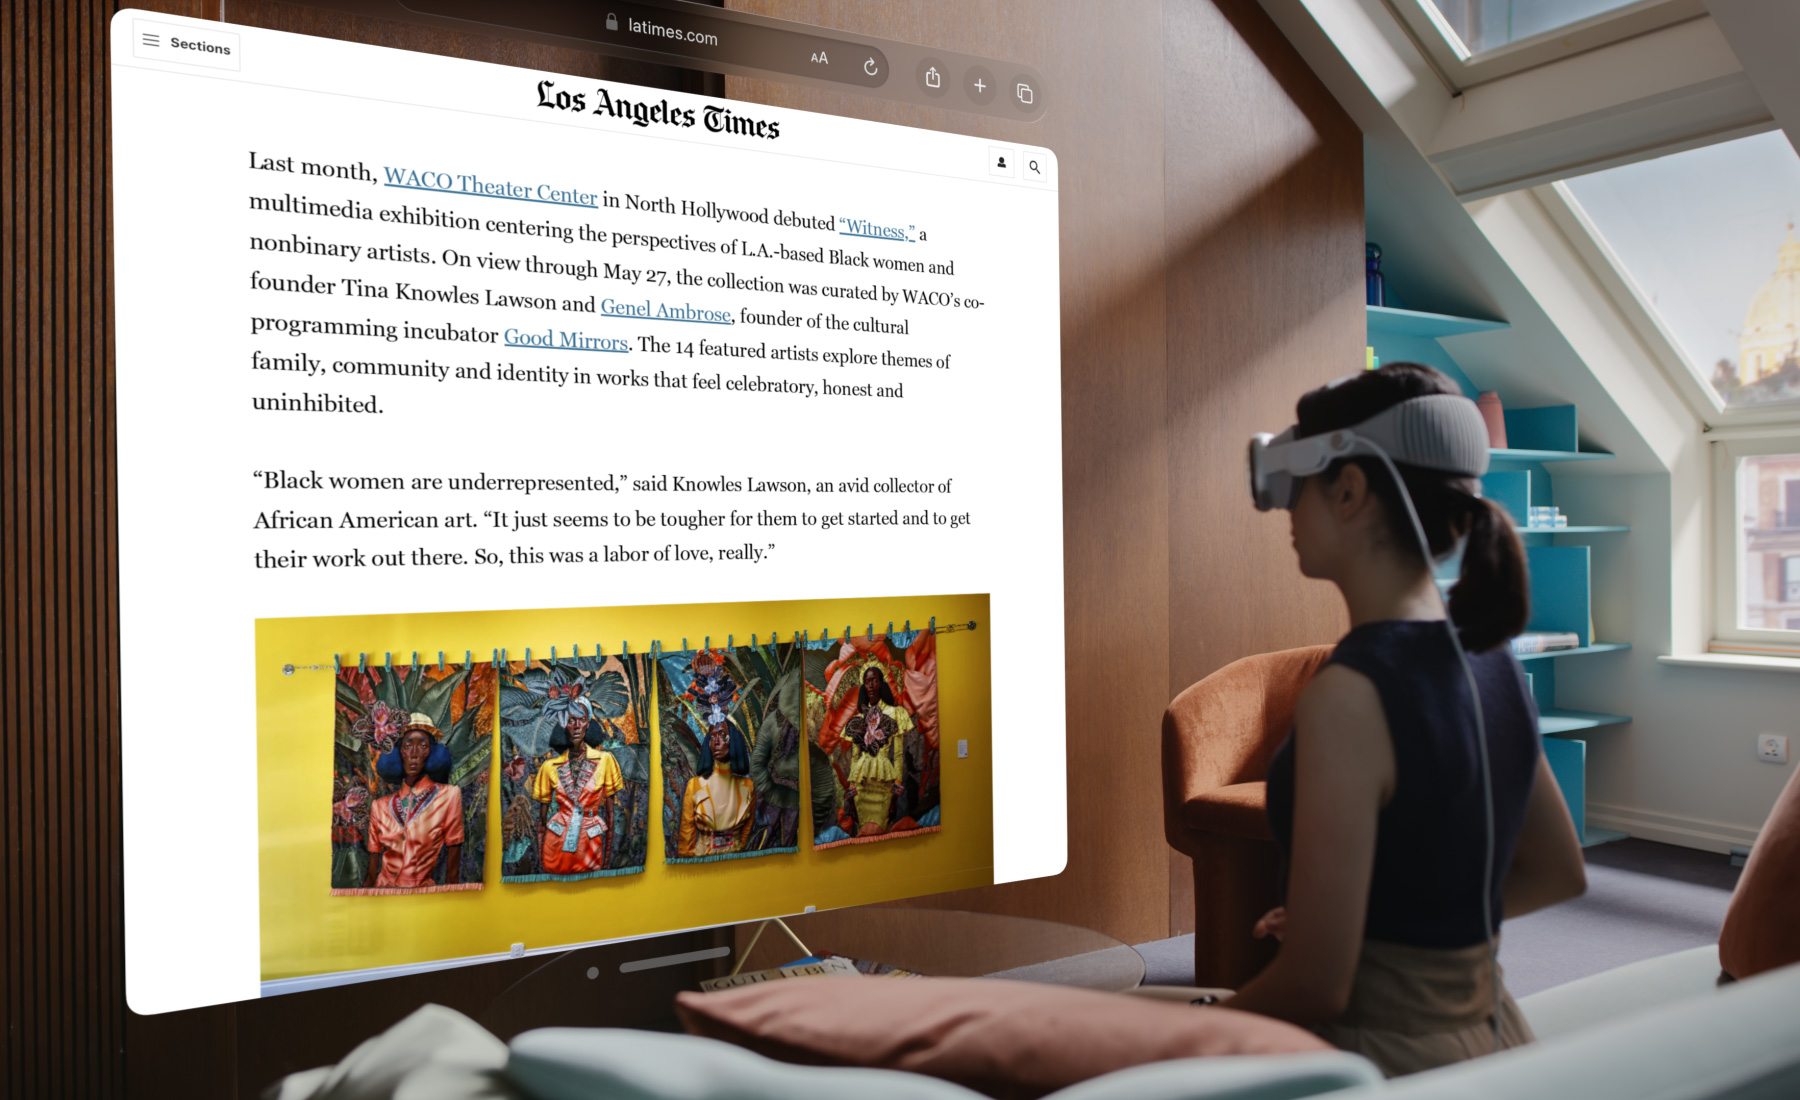 Discover the Immersive World of Apple Vision Pro - Overview of Apple Vision Pro technology